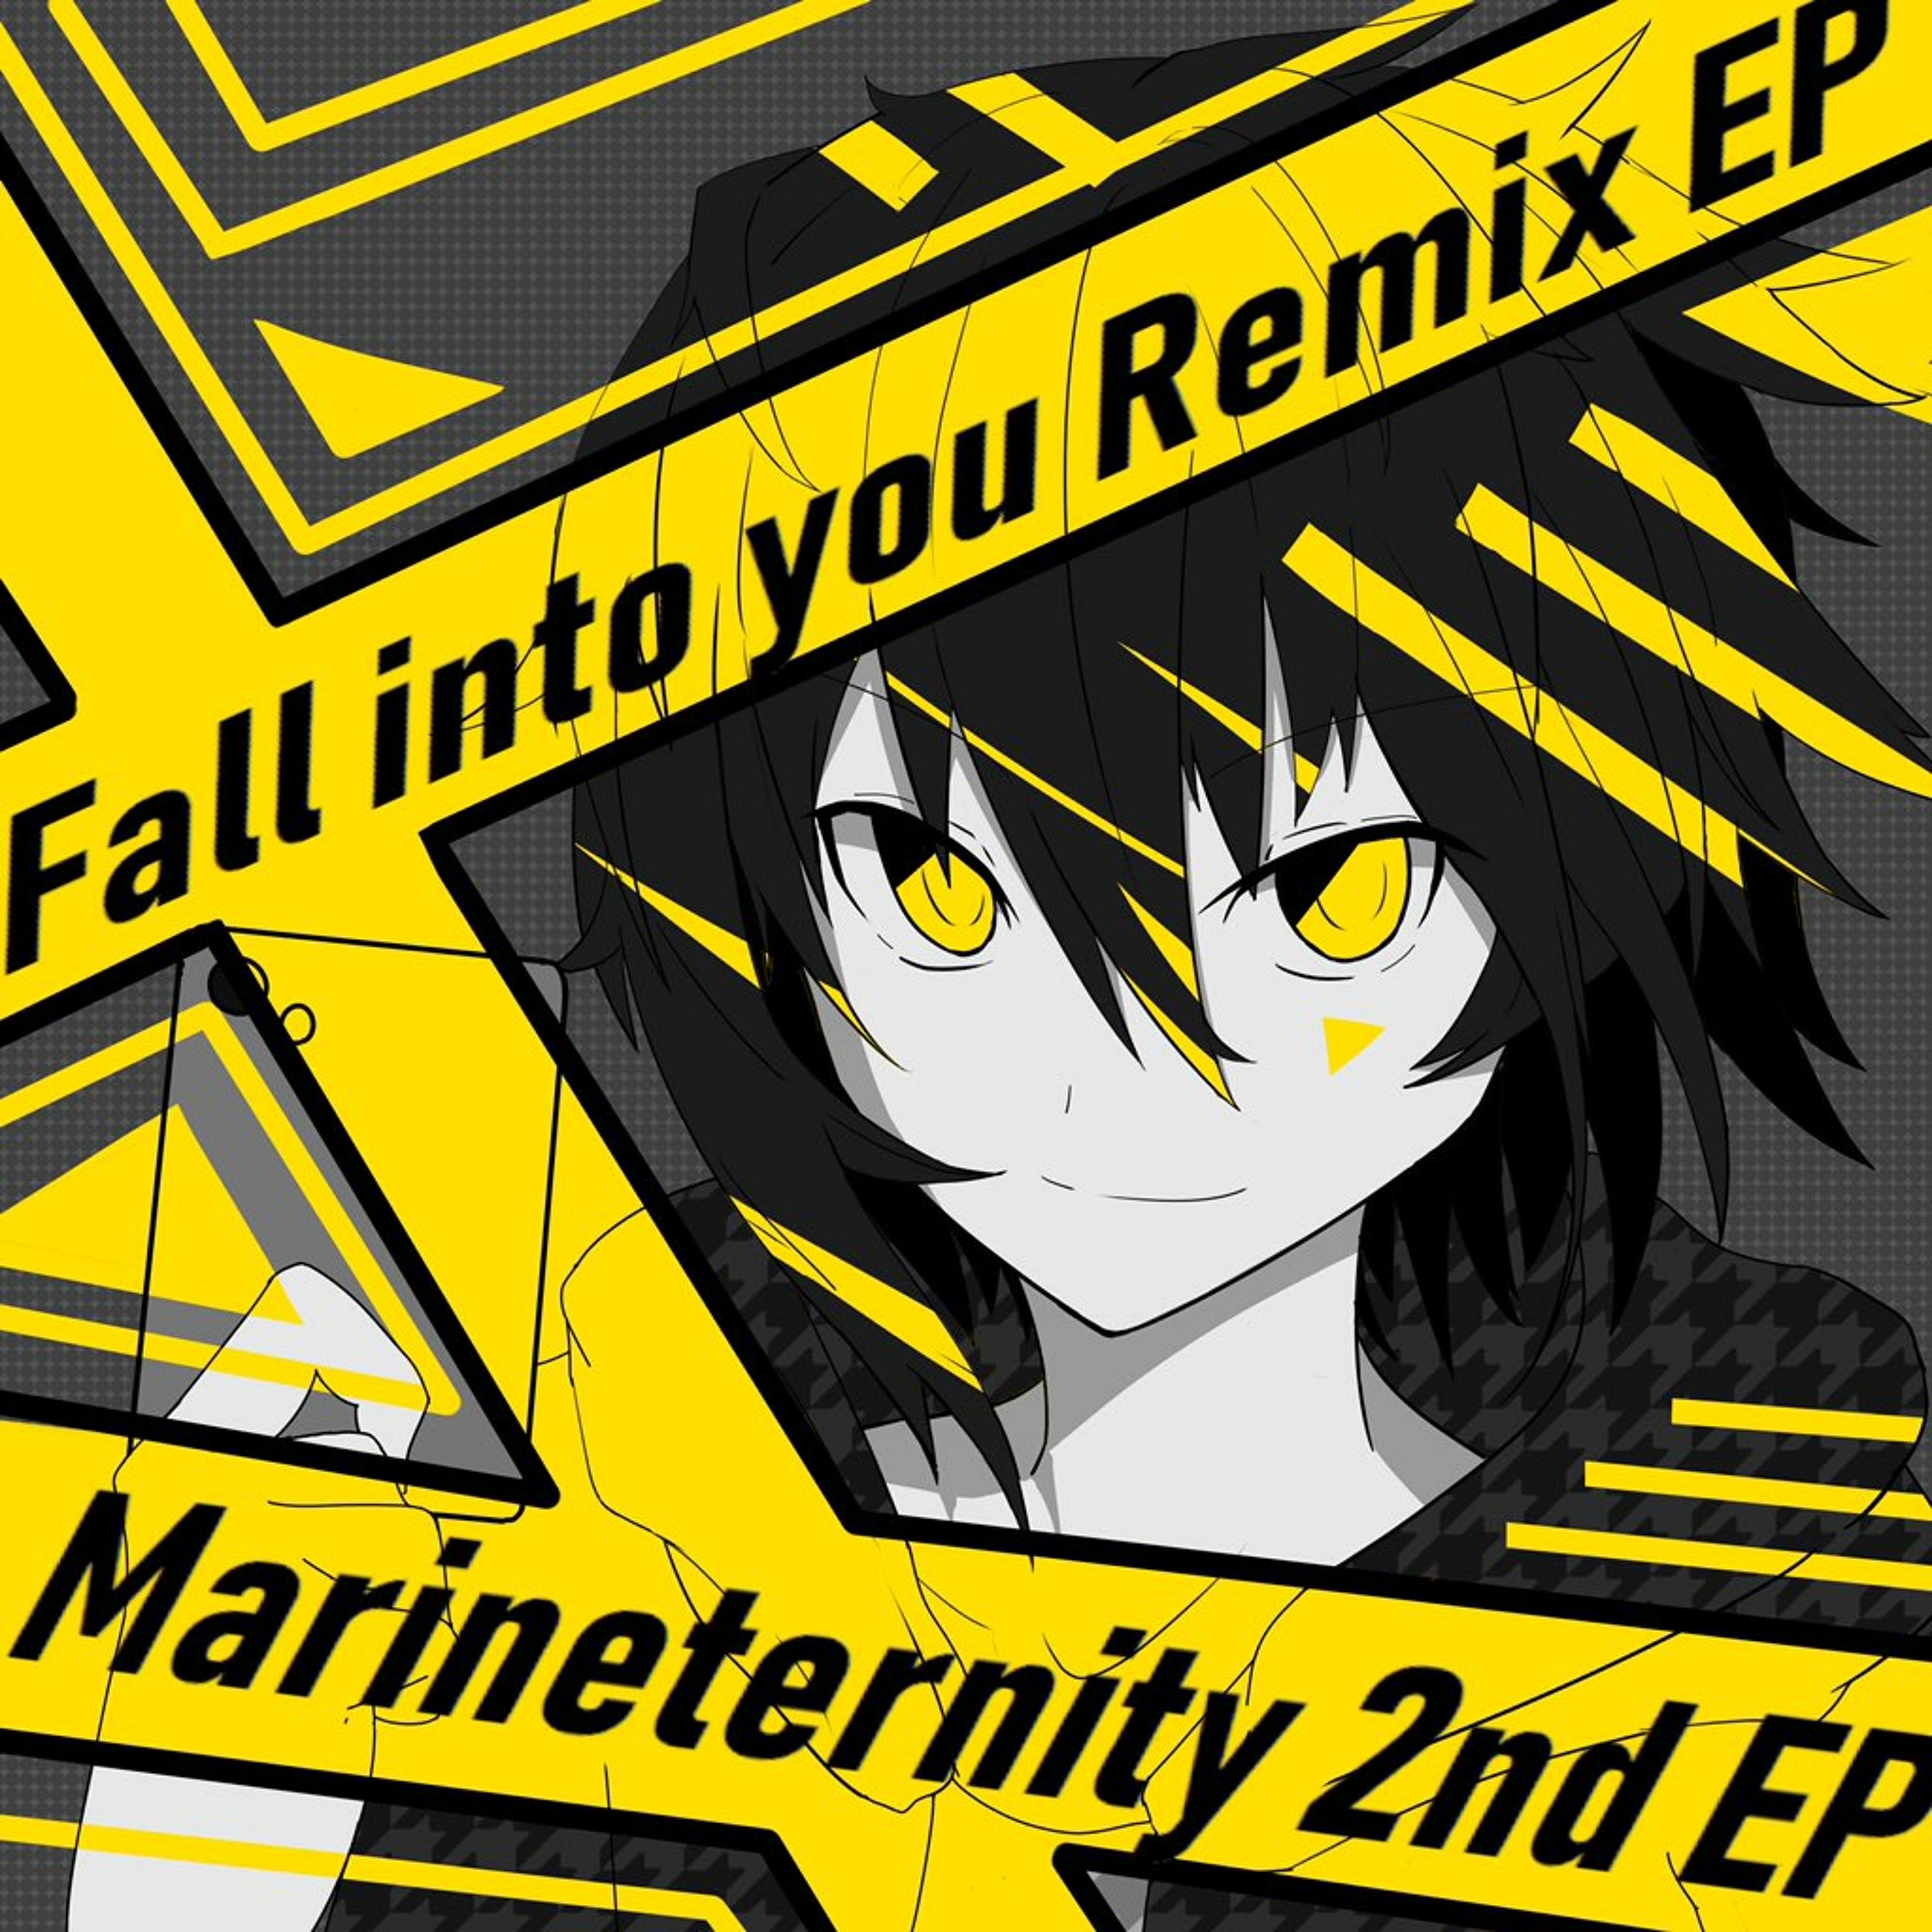 MarinEternity - Fall into you (Smile storm Remix)